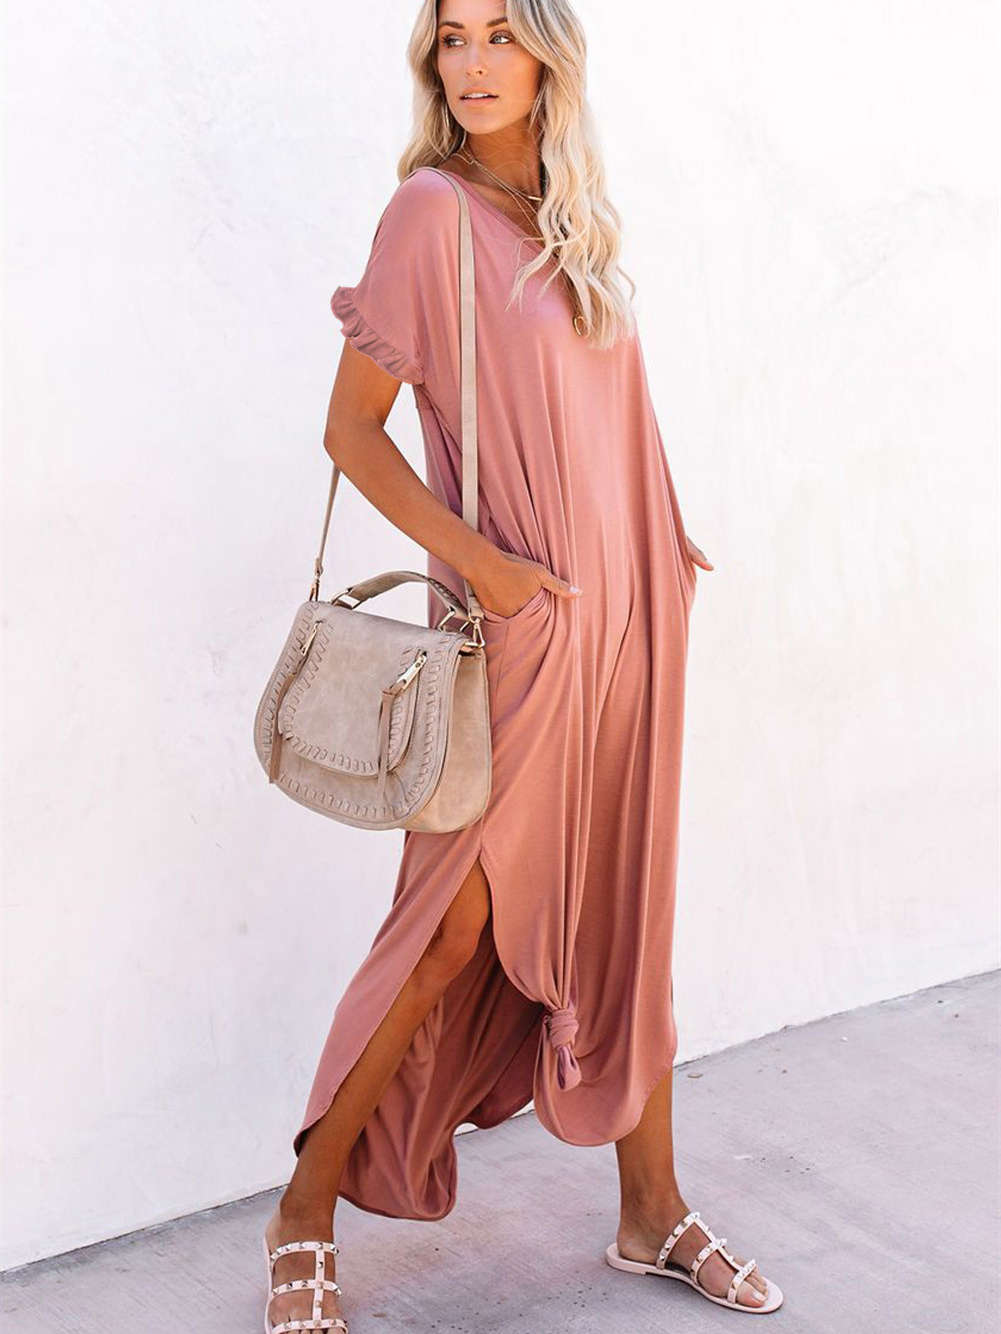 Loose Fit Cotton Blend V Neck Casual Maxi Dress with Slits